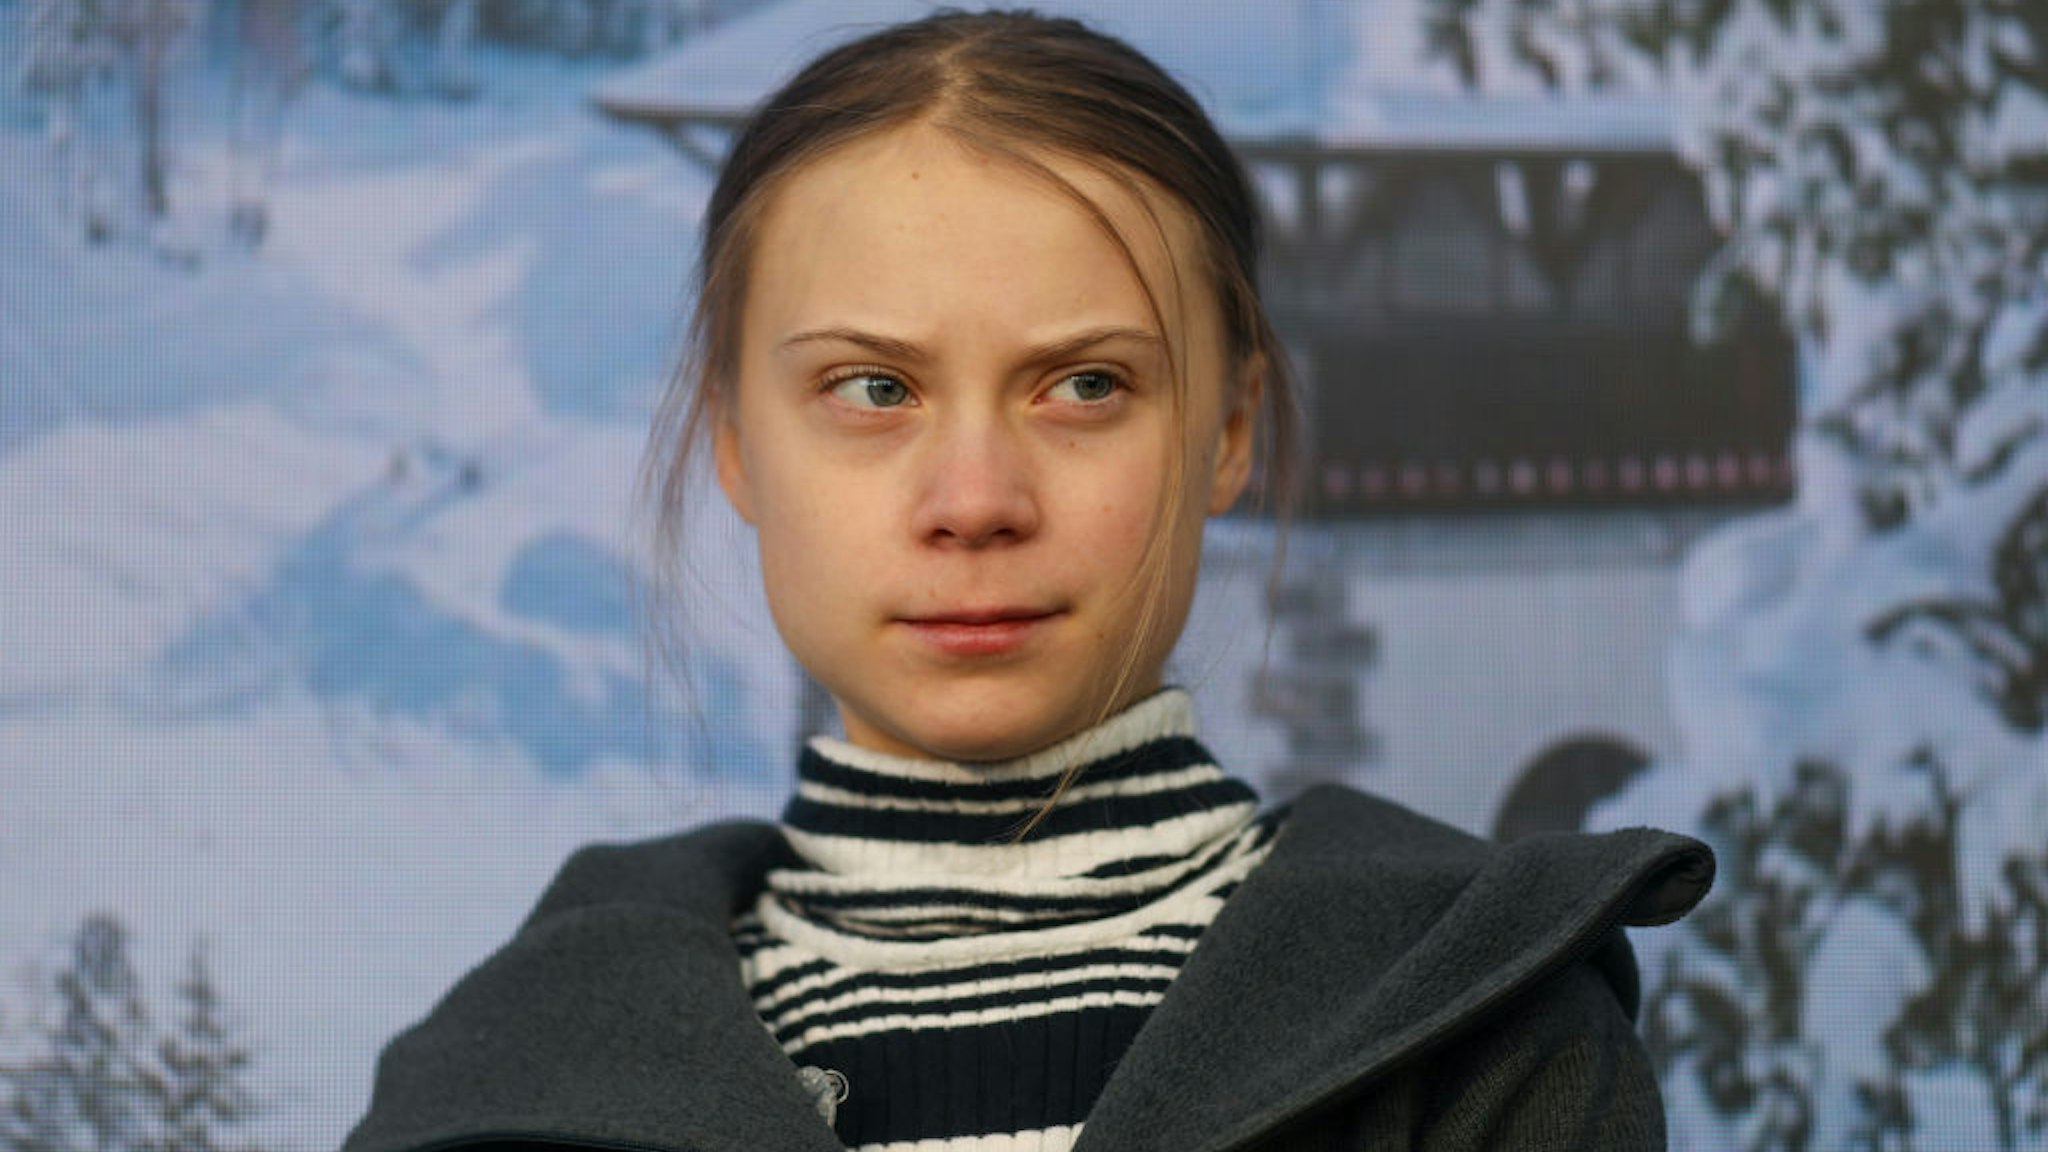 Greta Thunberg, climate activist, reacts during a news conference on the closing day of the World Economic Forum (WEF) in Davos, Switzerland, on Friday, Jan. 24, 2020.